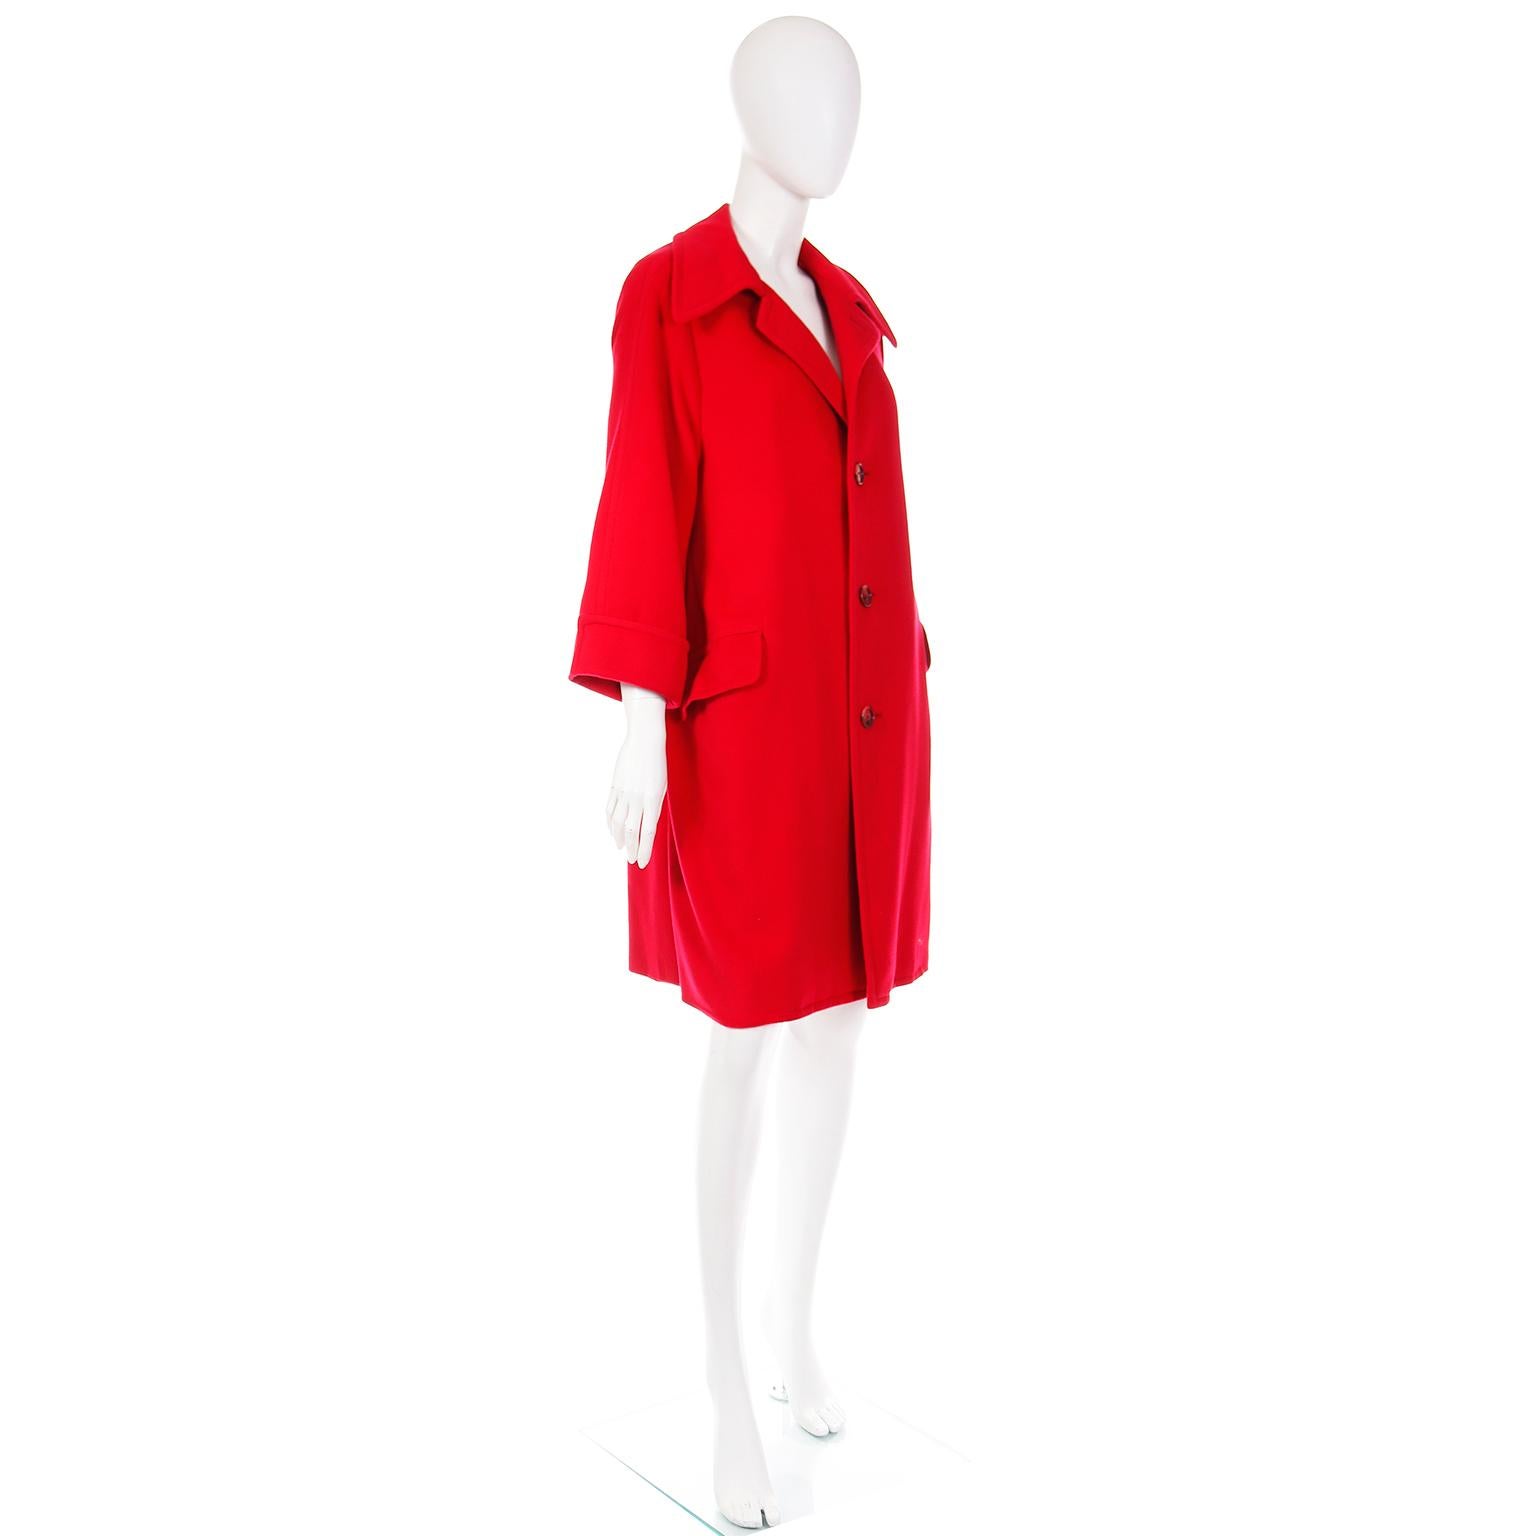 Vintage 1980s British Textiles Red Cashmere Coat In Excellent Condition For Sale In Portland, OR